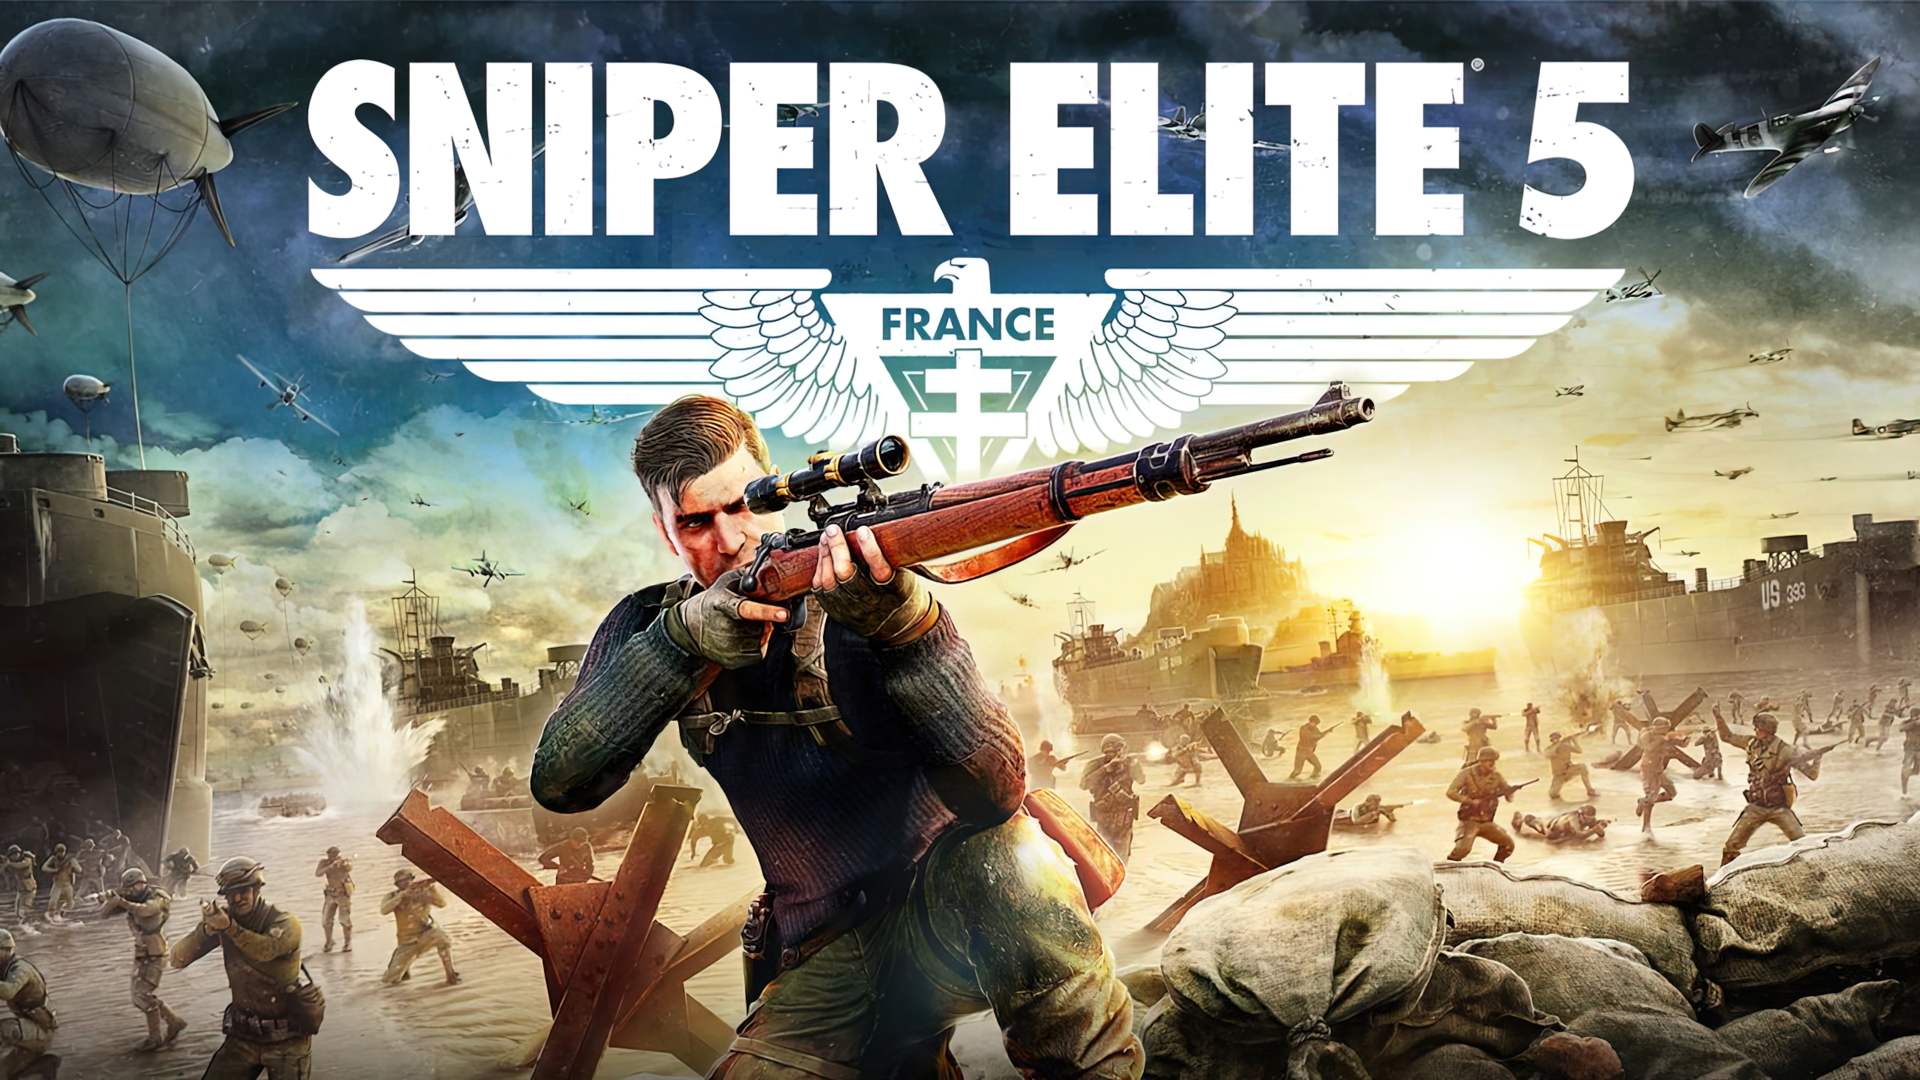 Are you ready for Sniper Elite 5 Game Pass? The game will be available on May 25th. Learn how to fix the Windows cannot access the specified device error too!